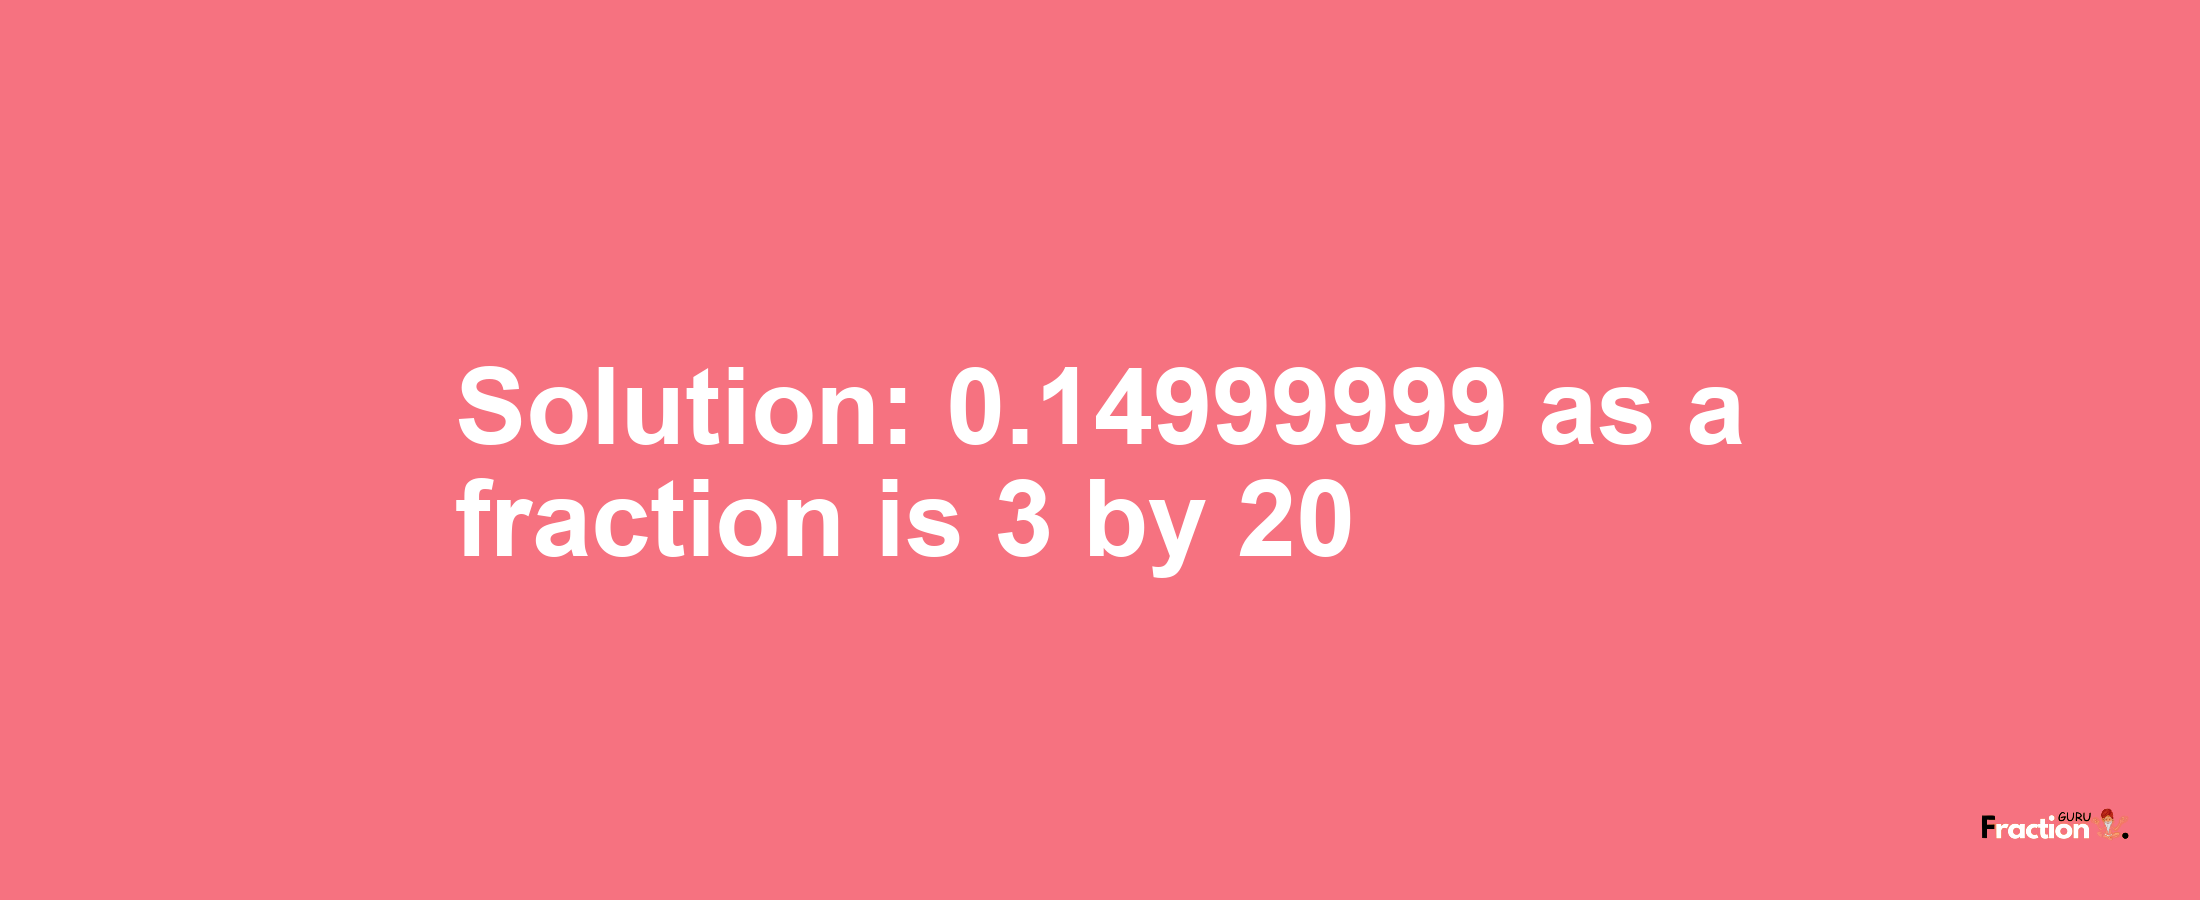 Solution:0.14999999 as a fraction is 3/20